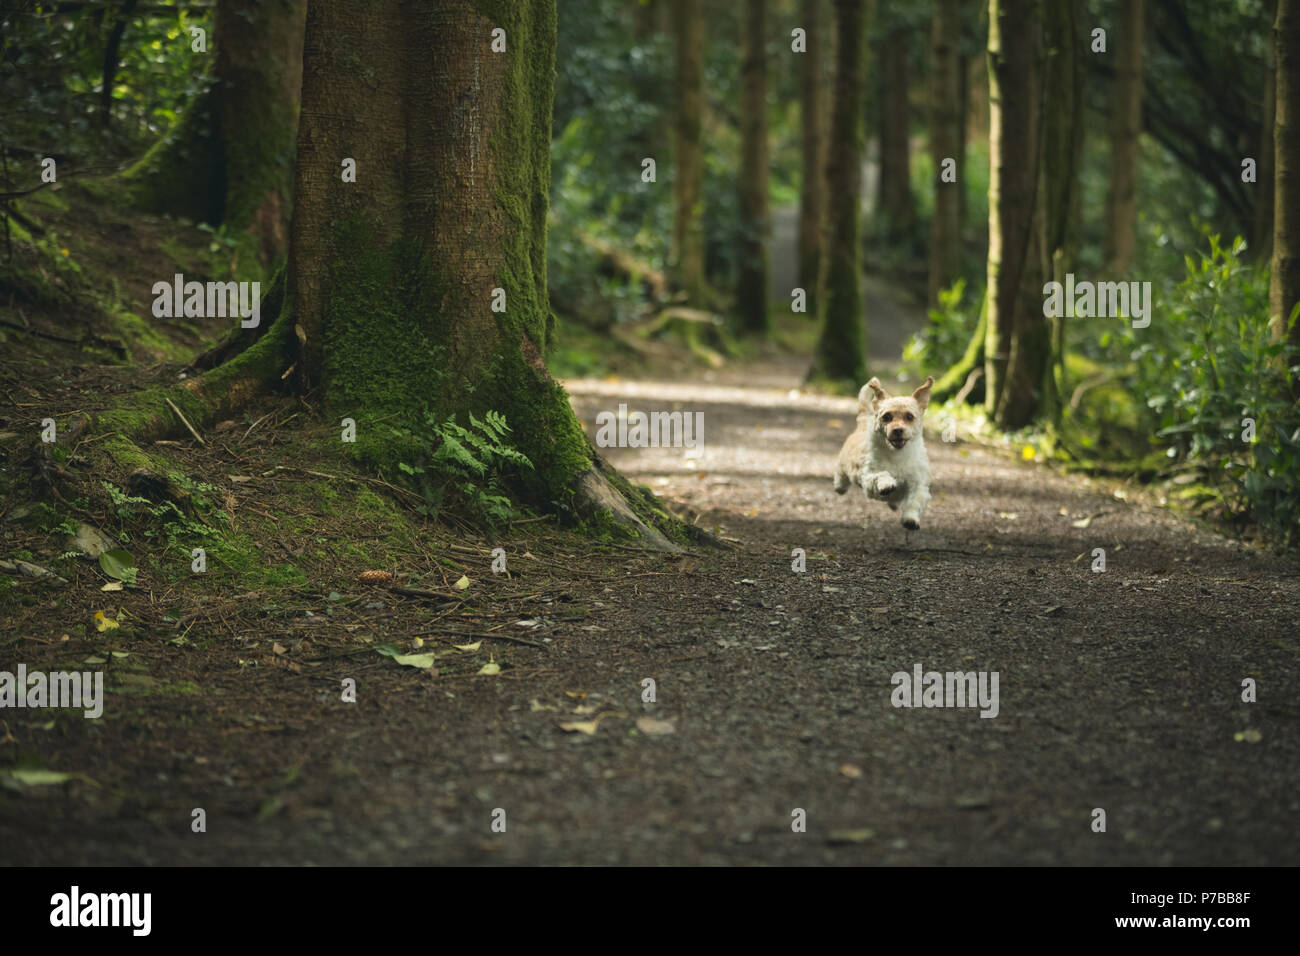 Dog running on track in forest Stock Photo